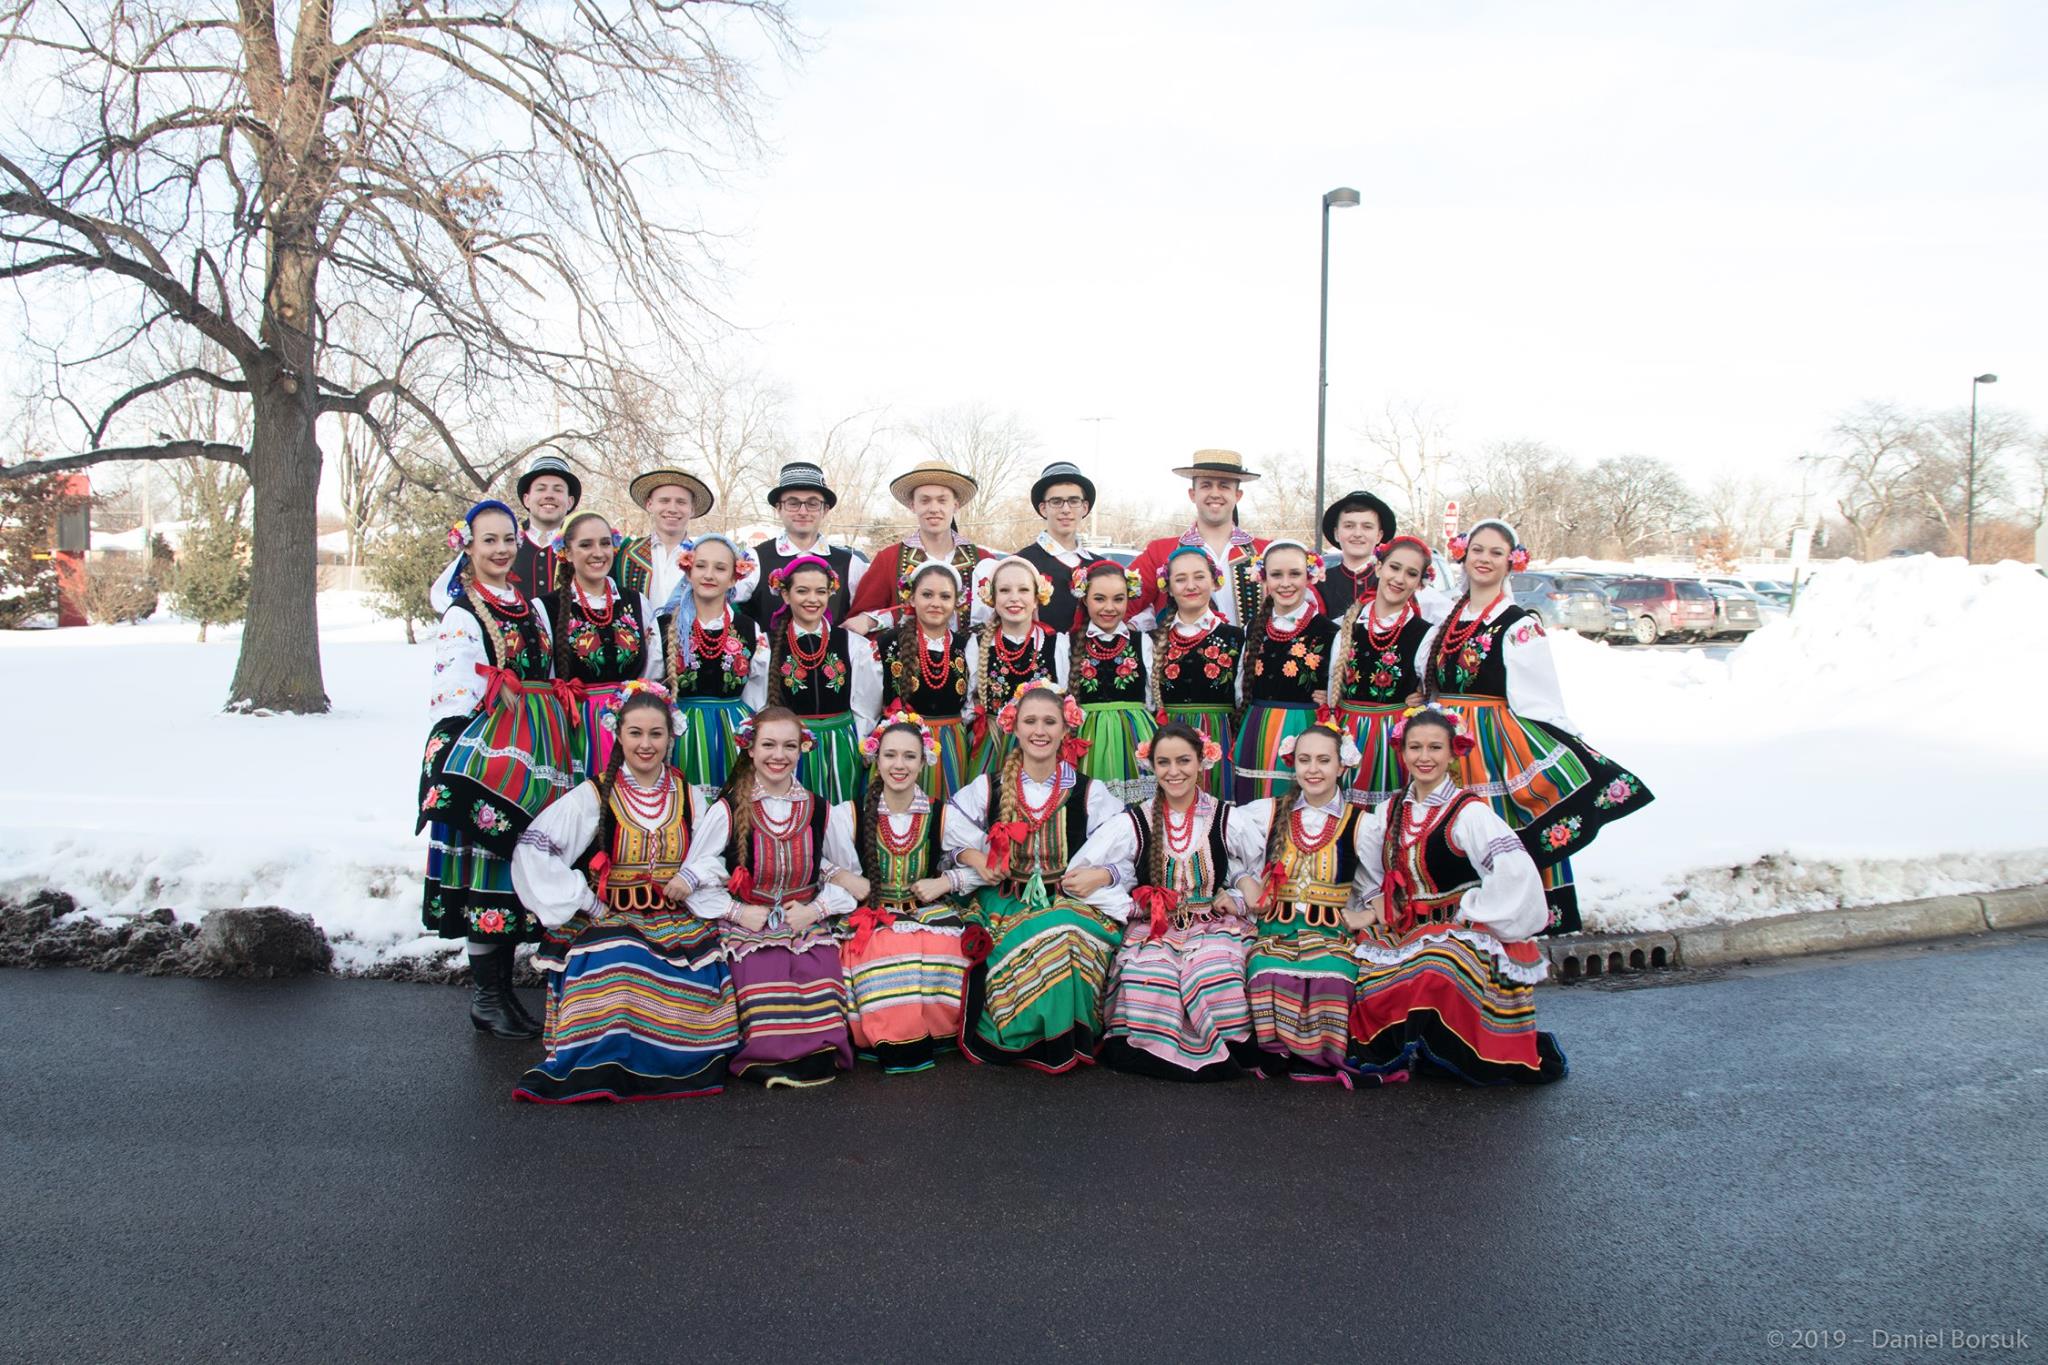 Polonia Polish Folk and Dance Ensemble performed at the 2019 Coming Together Festival